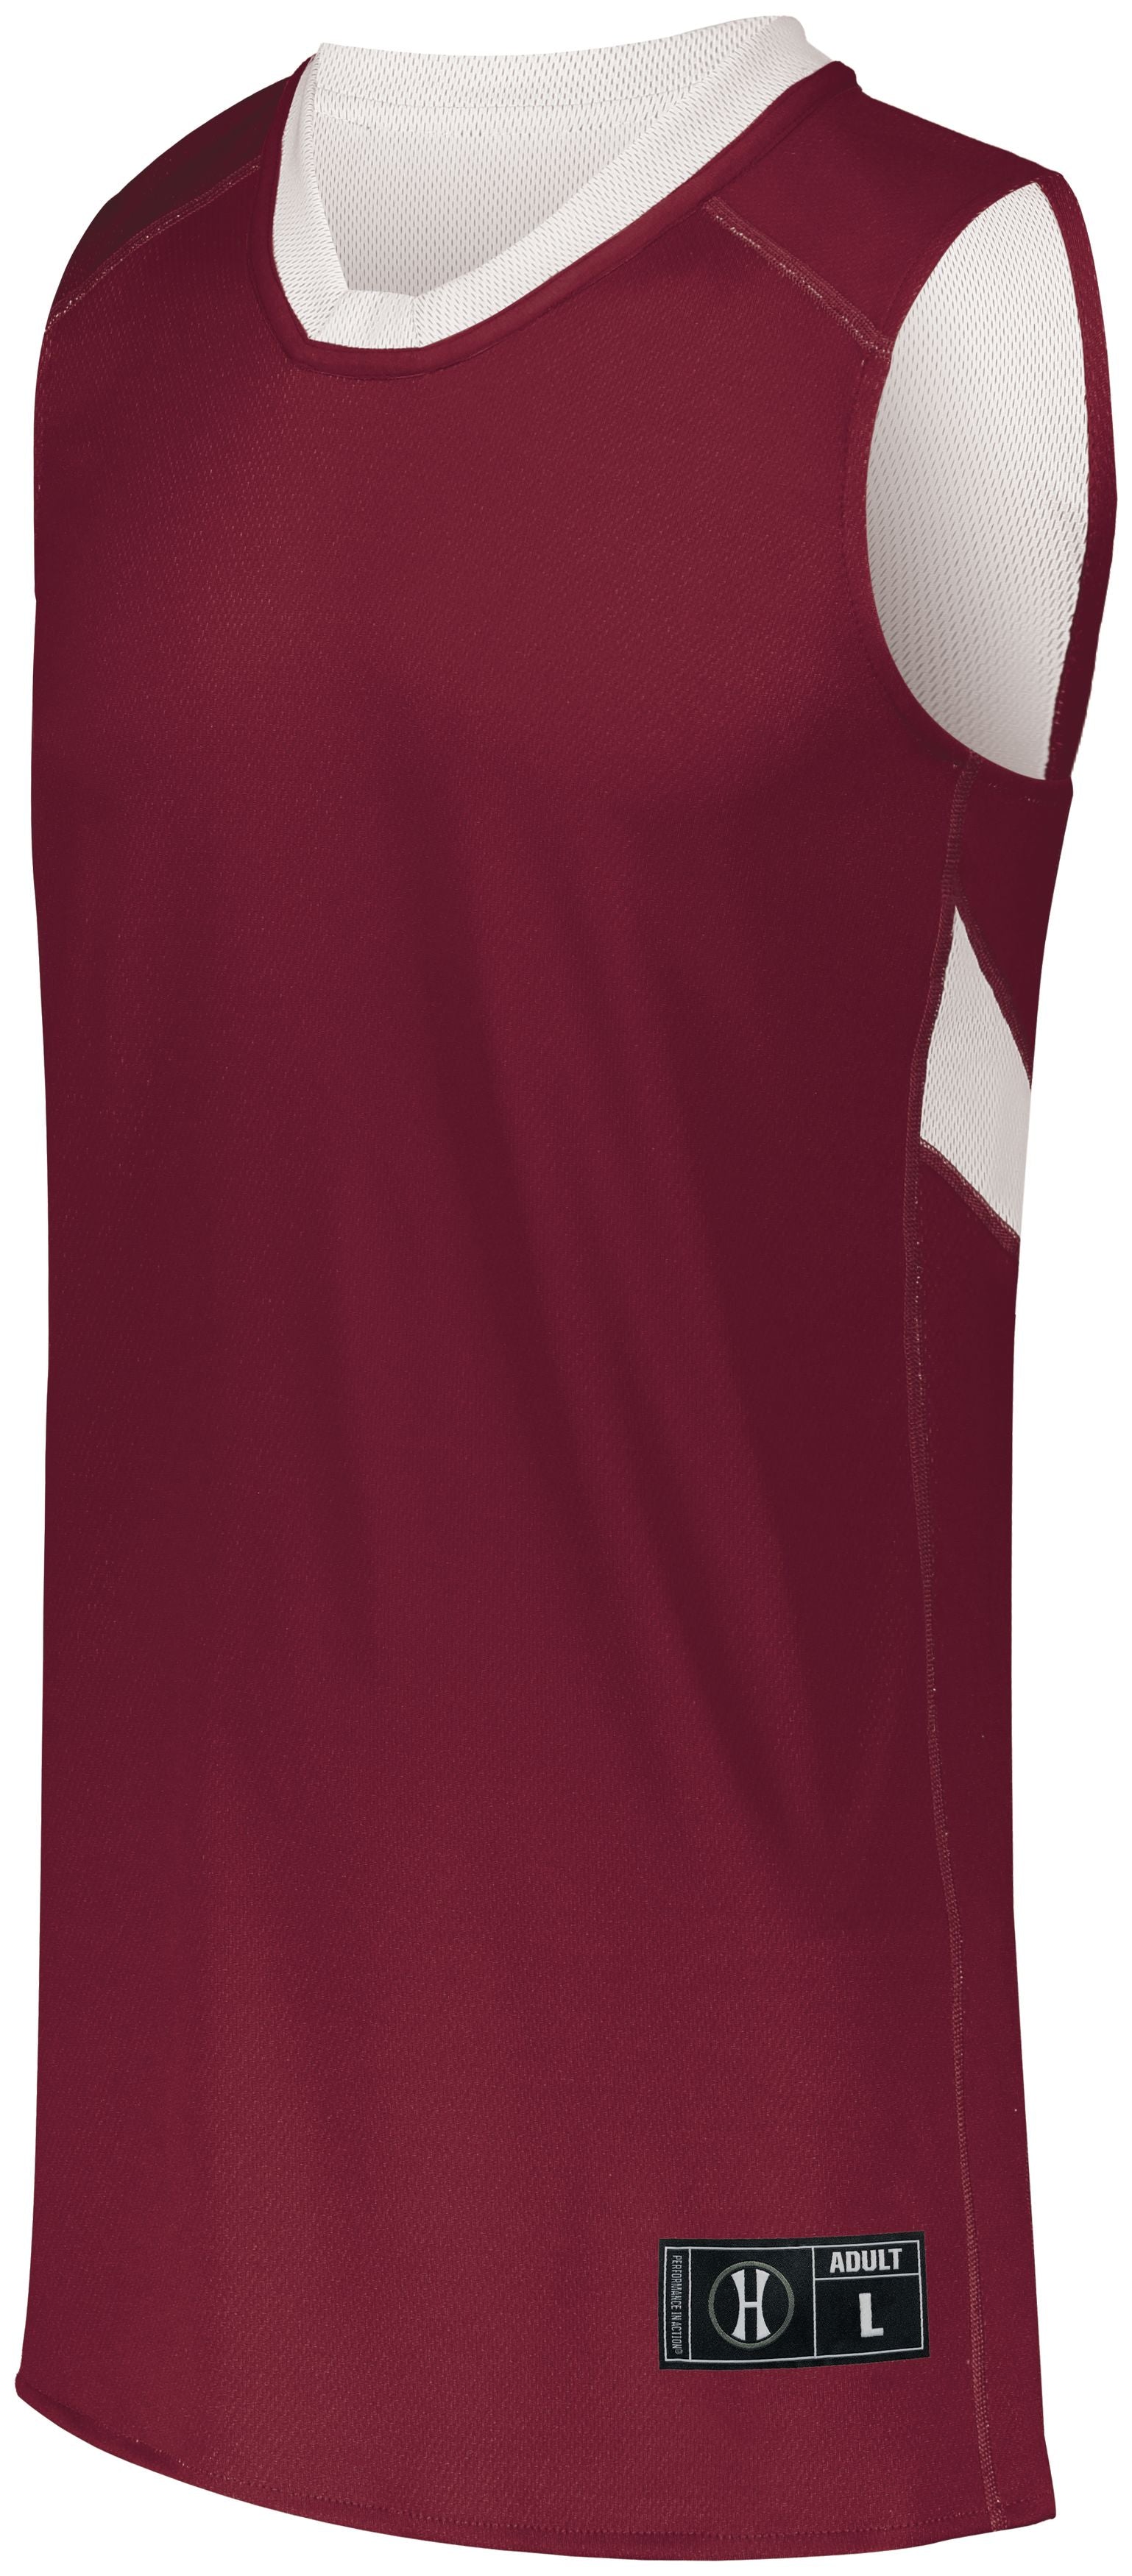 Holloway Dual-Side Single Ply Basketball Jersey in Cardinal/White  -Part of the Adult, Adult-Jersey, Basketball, Holloway, Shirts, All-Sports, All-Sports-1 product lines at KanaleyCreations.com